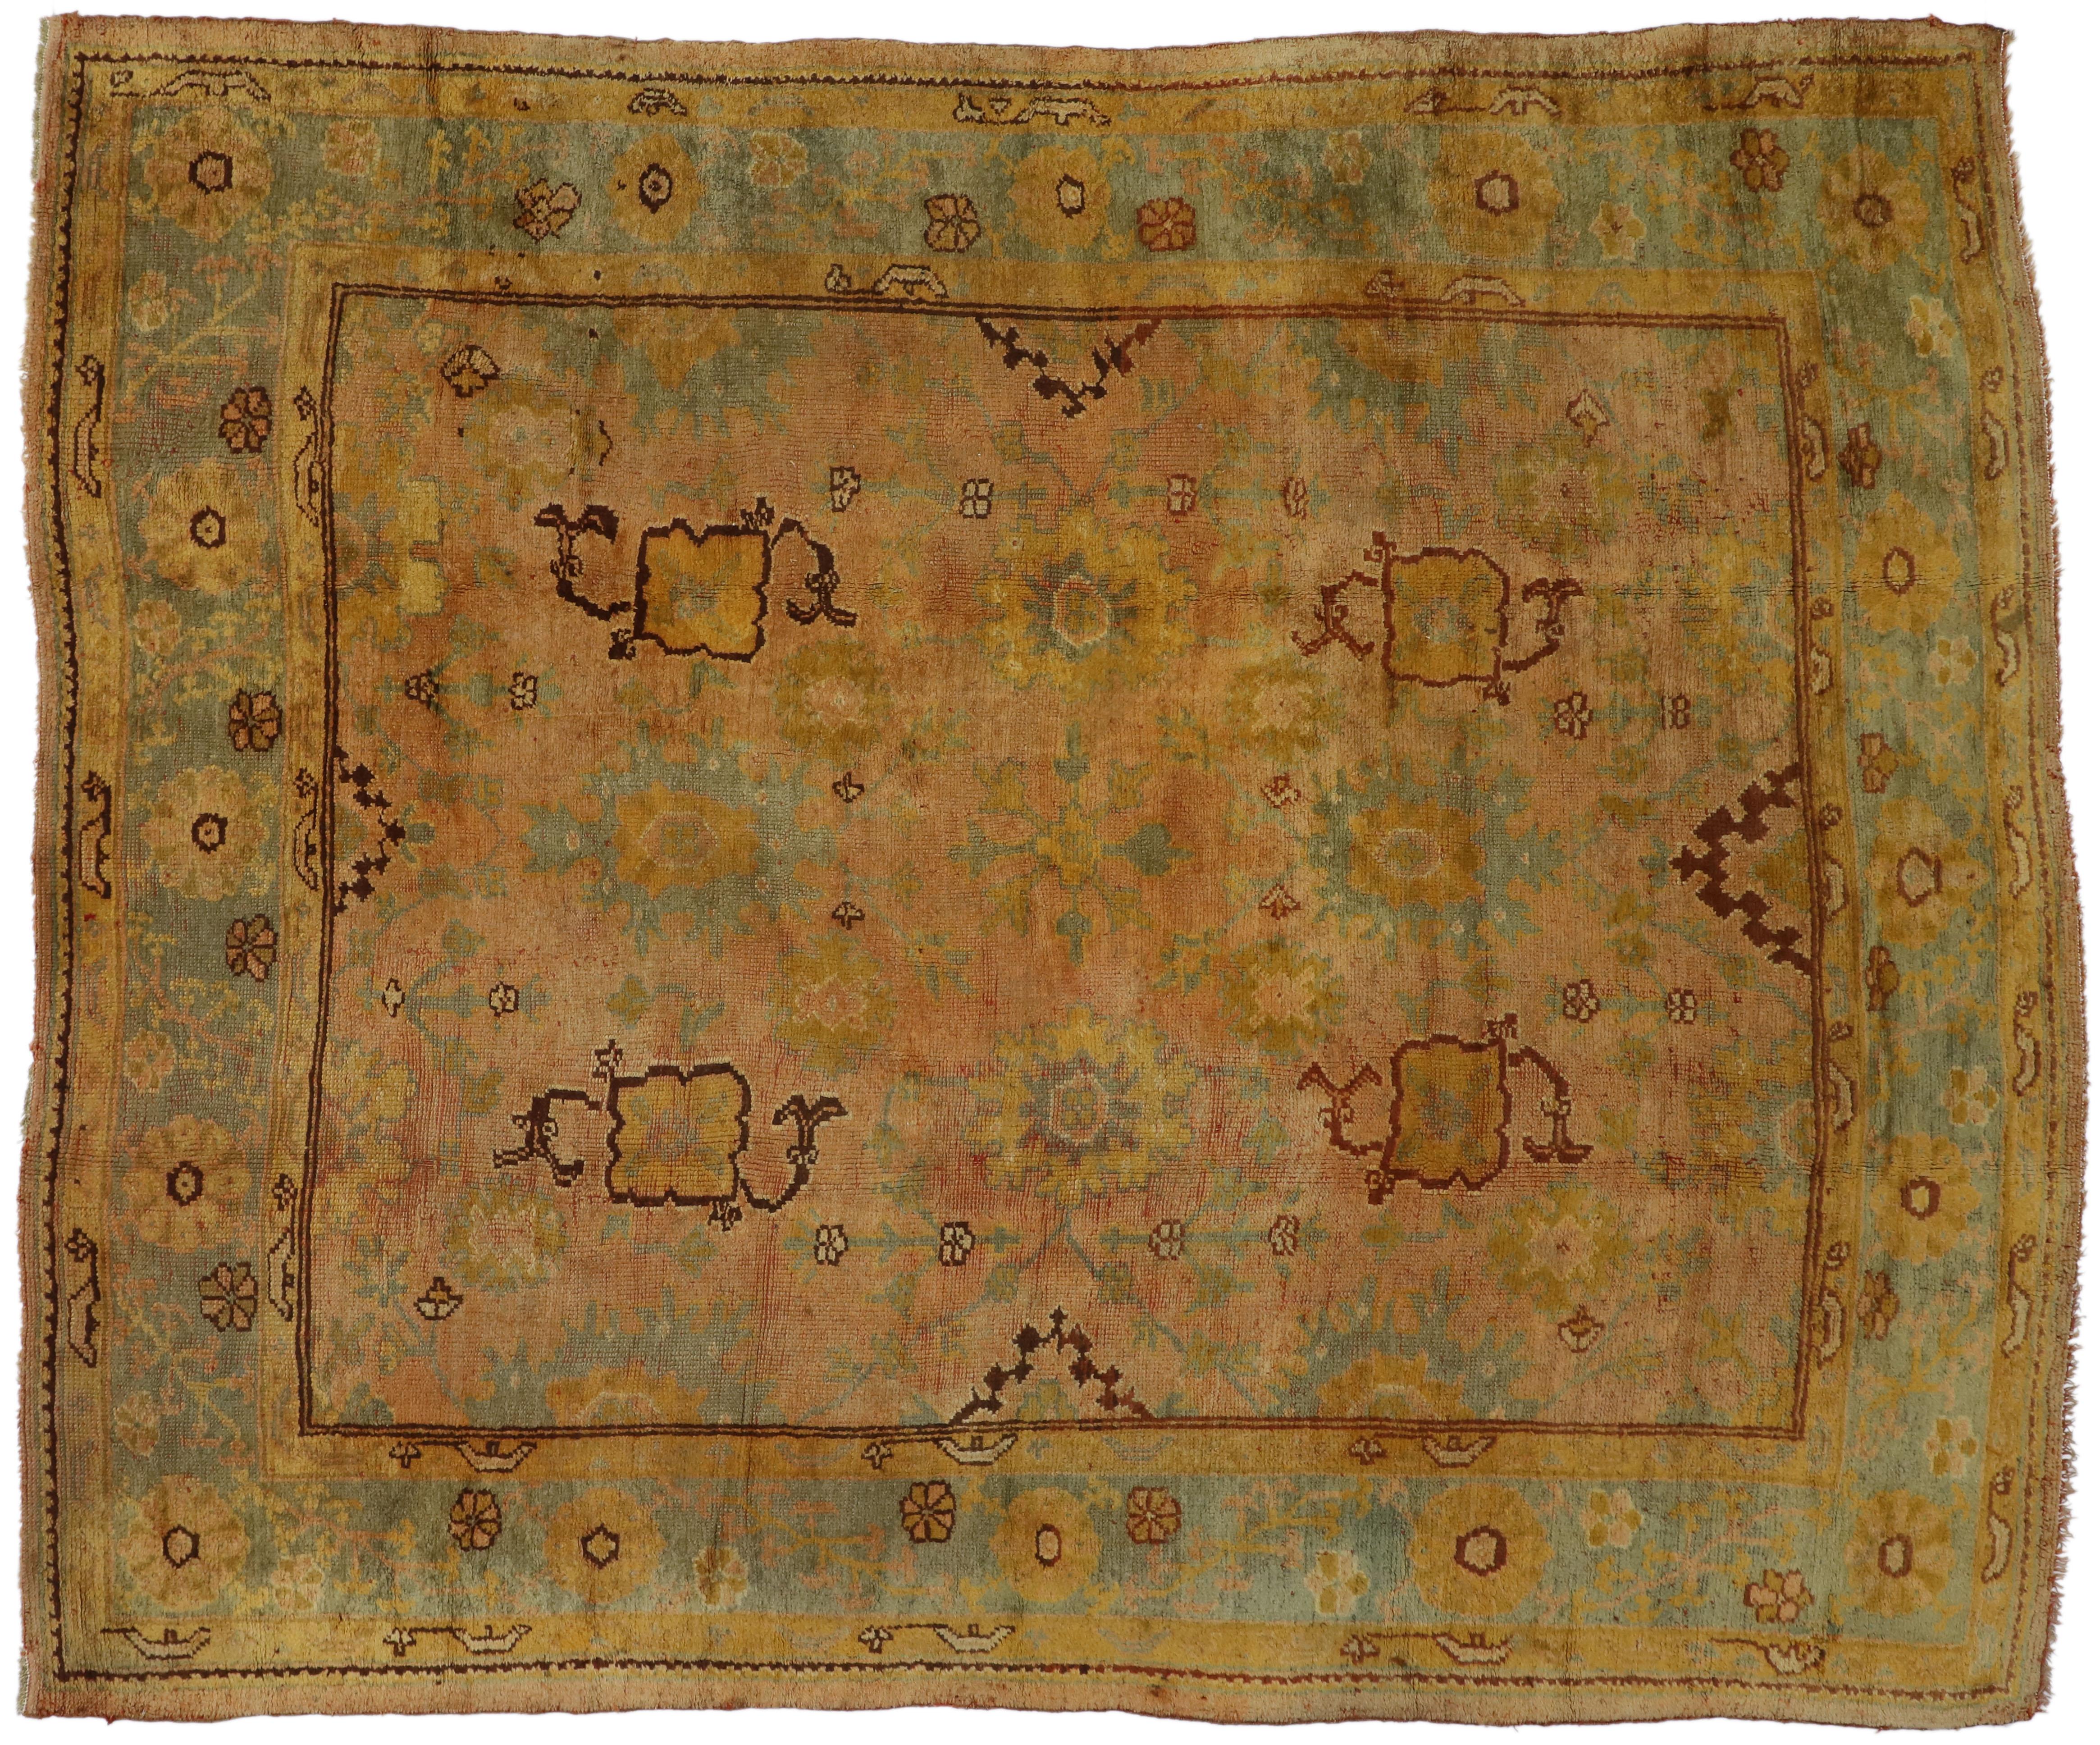 73987 Antique Turkish Oushak Area Rug with French Provincial and Louis XIV Style. This hand-knotted wool antique Turkish Oushak rug features an all-over geometric pattern composed of Harshang-style motifs, blooming palmettes, leafy tendrils, organic